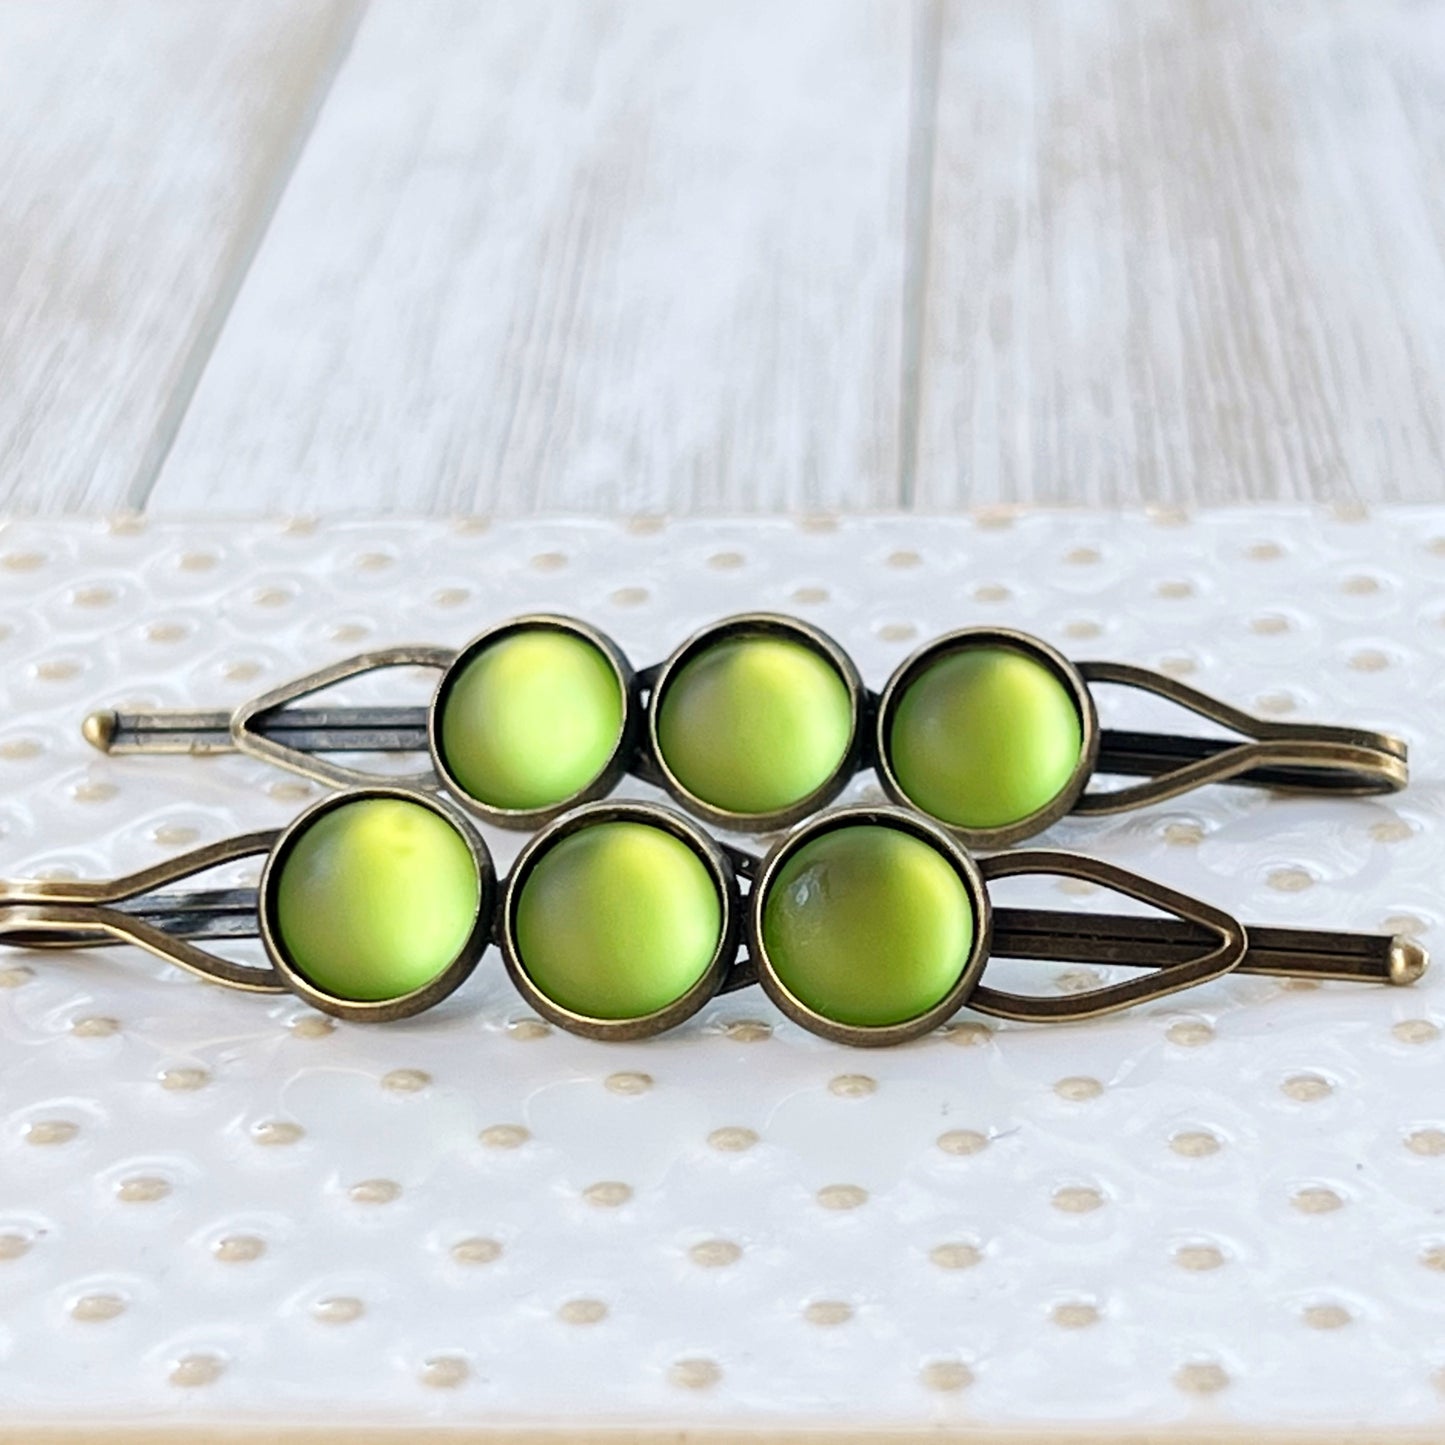 Candy Green Satin Acrylic Hair Pins: Sweet & Vibrant Accessories for Your Hair